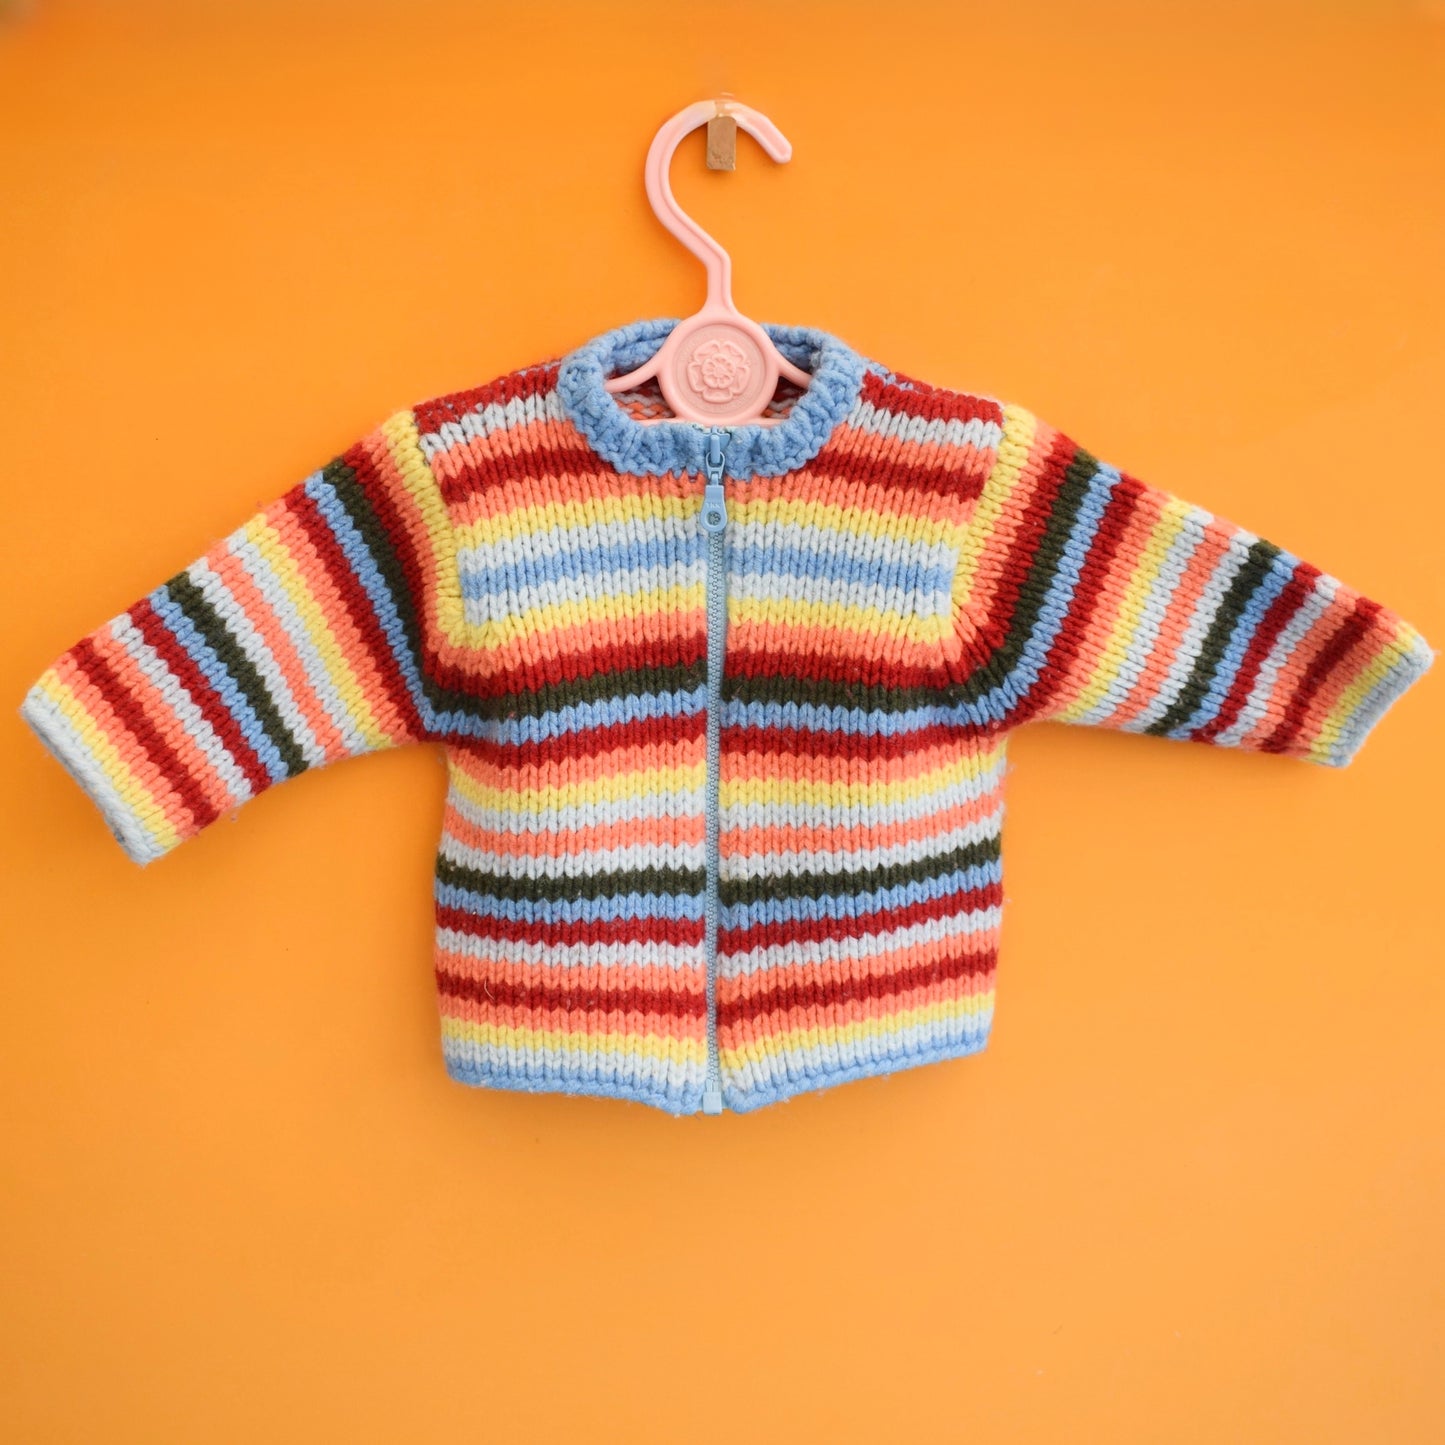 Vintage 1980s Knitted Cardigan - Benetton - 6 Months